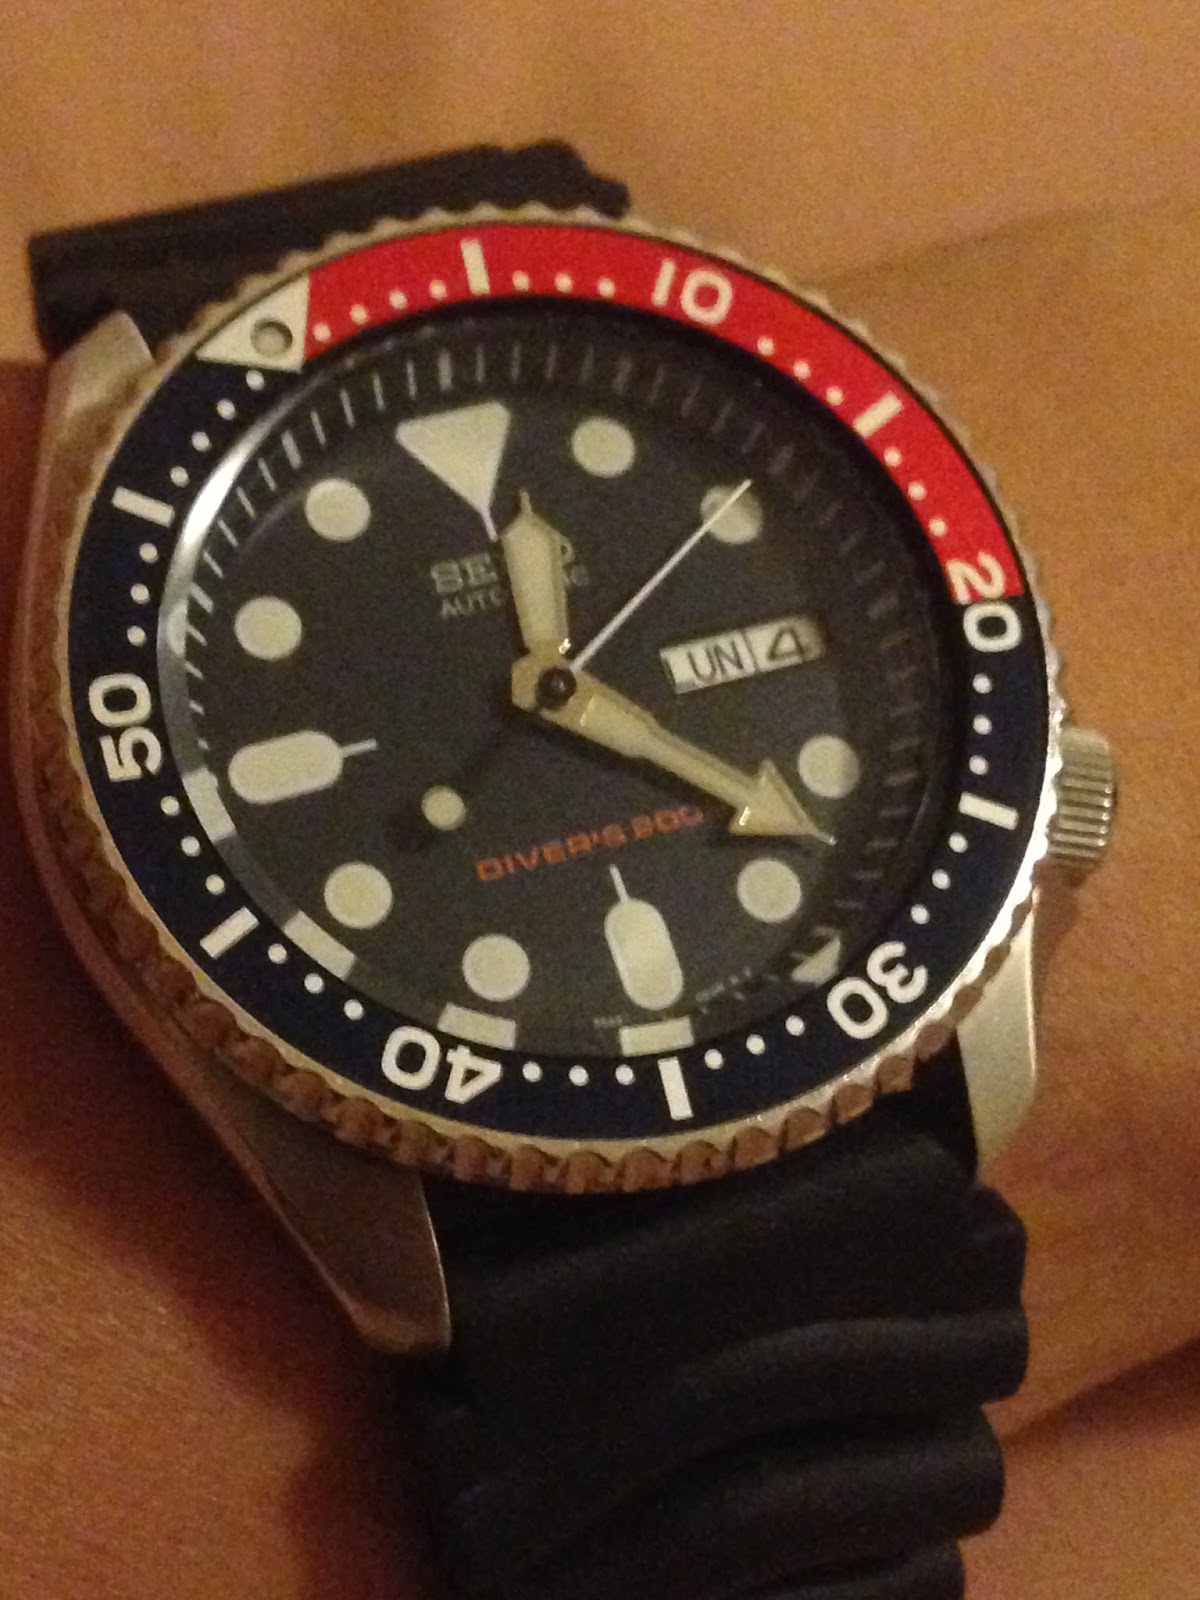 My Eastern Watch Collection: Seiko SKX009K1 Automatic Professional Diver  200M - A Good Cheap Watch, A Review